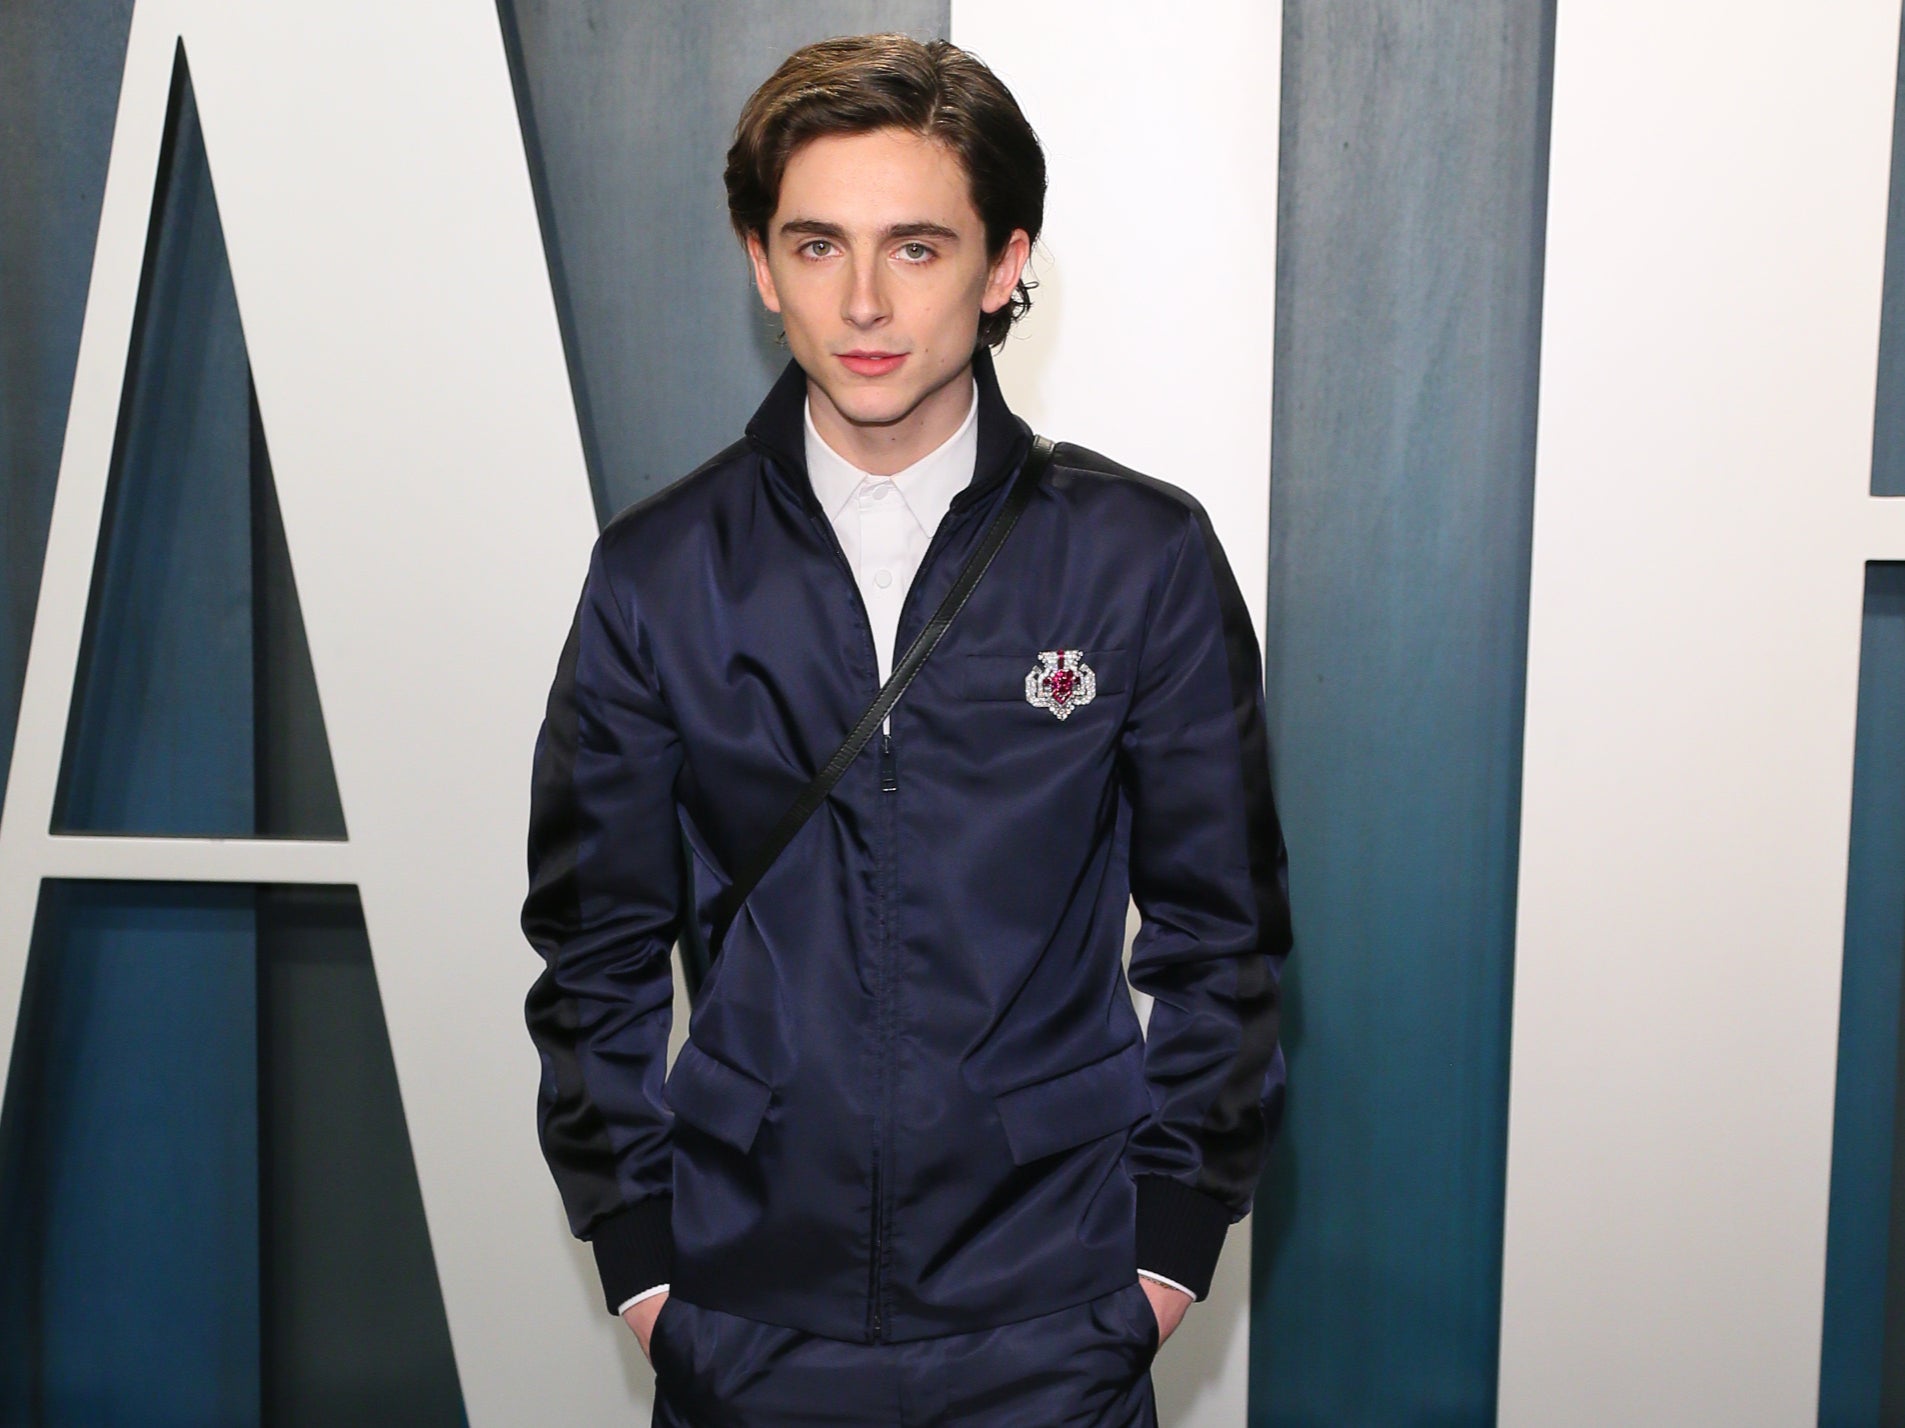 Timothée Chalamet attends the 2020 Vanity Fair Oscar Party on 9 February 2020 in Beverly Hills, California